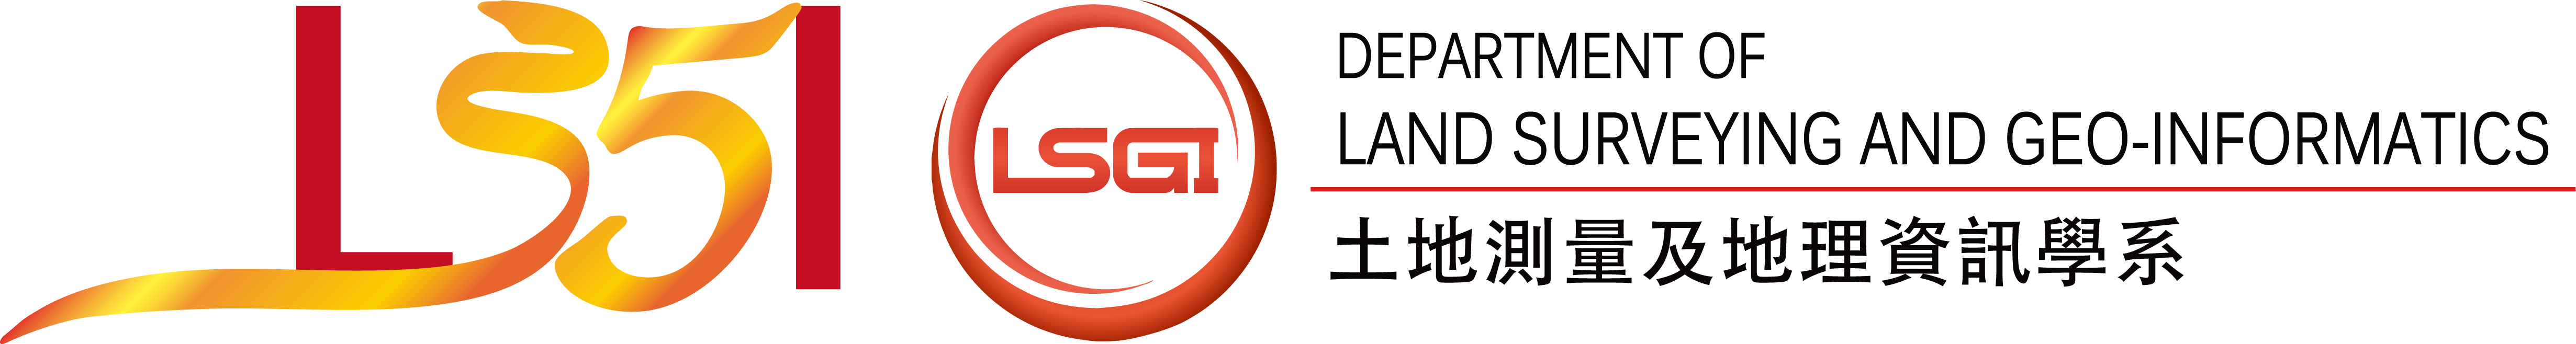 The Department of Land Surveying and Geo-Informatics